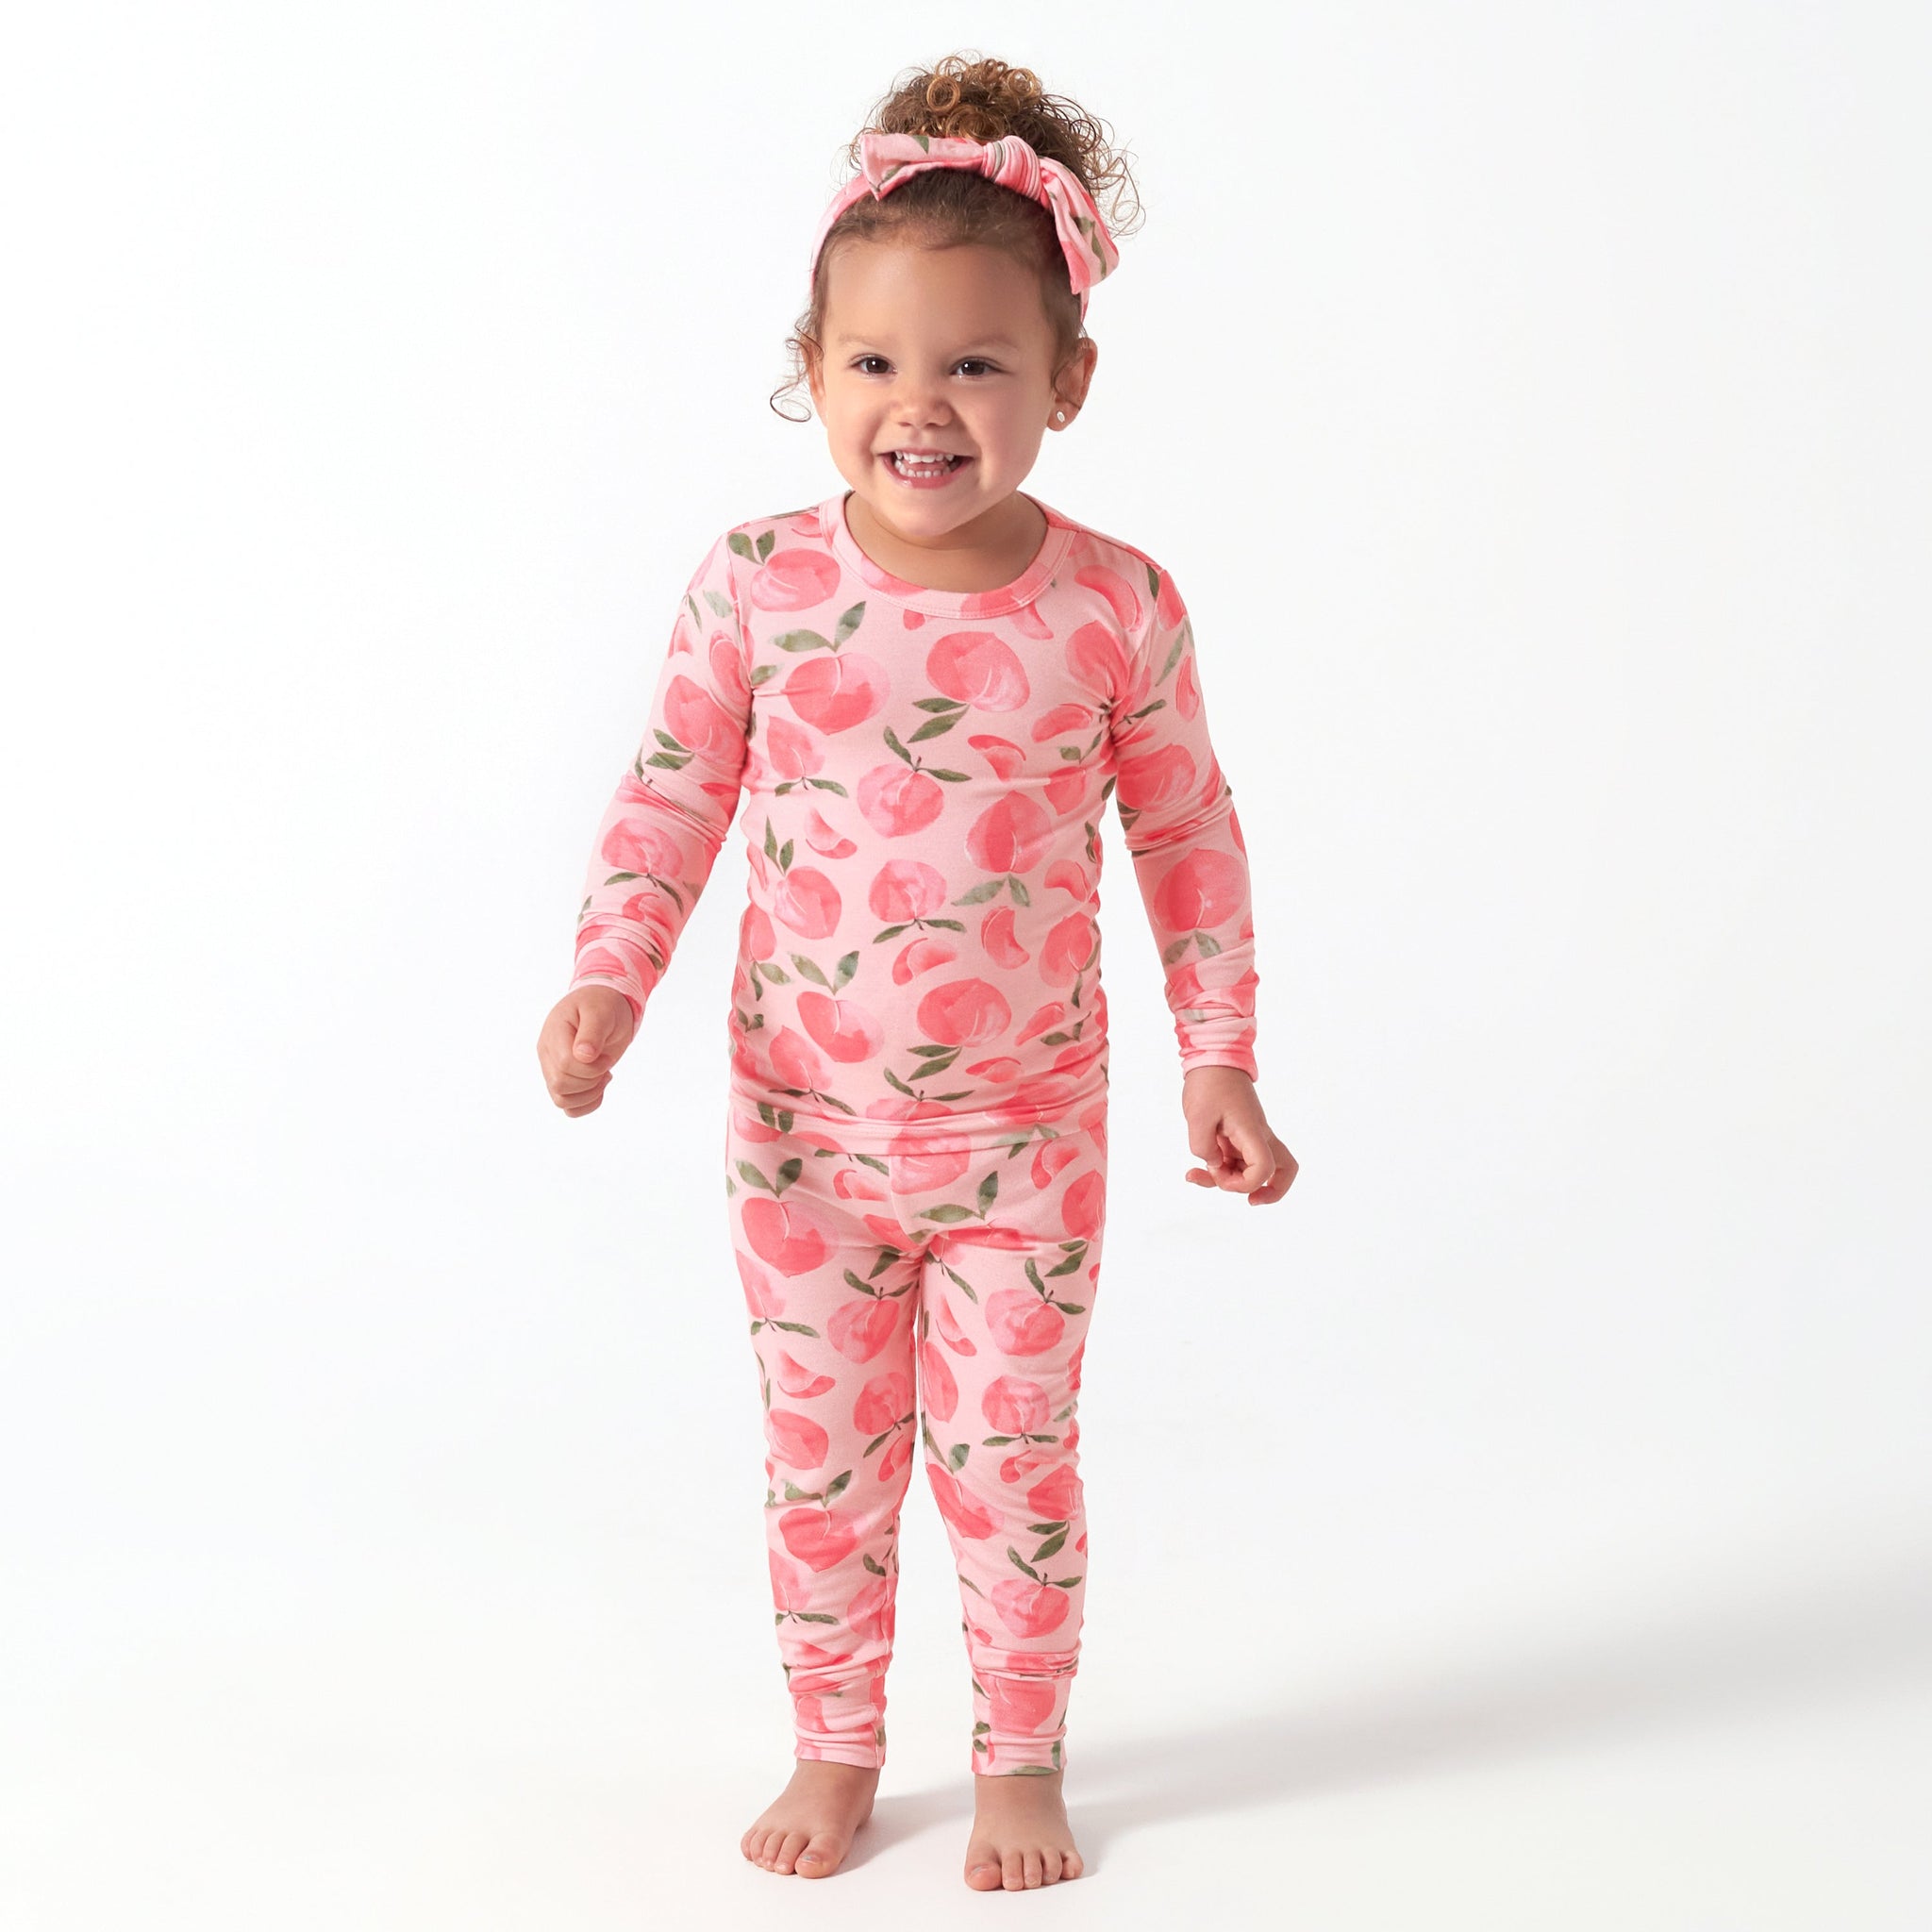 2-Piece Infant & Toddler Girls Just Peachy Buttery Soft Viscose Made from Eucalyptus Snug Fit Pajamas-Gerber Childrenswear Wholesale